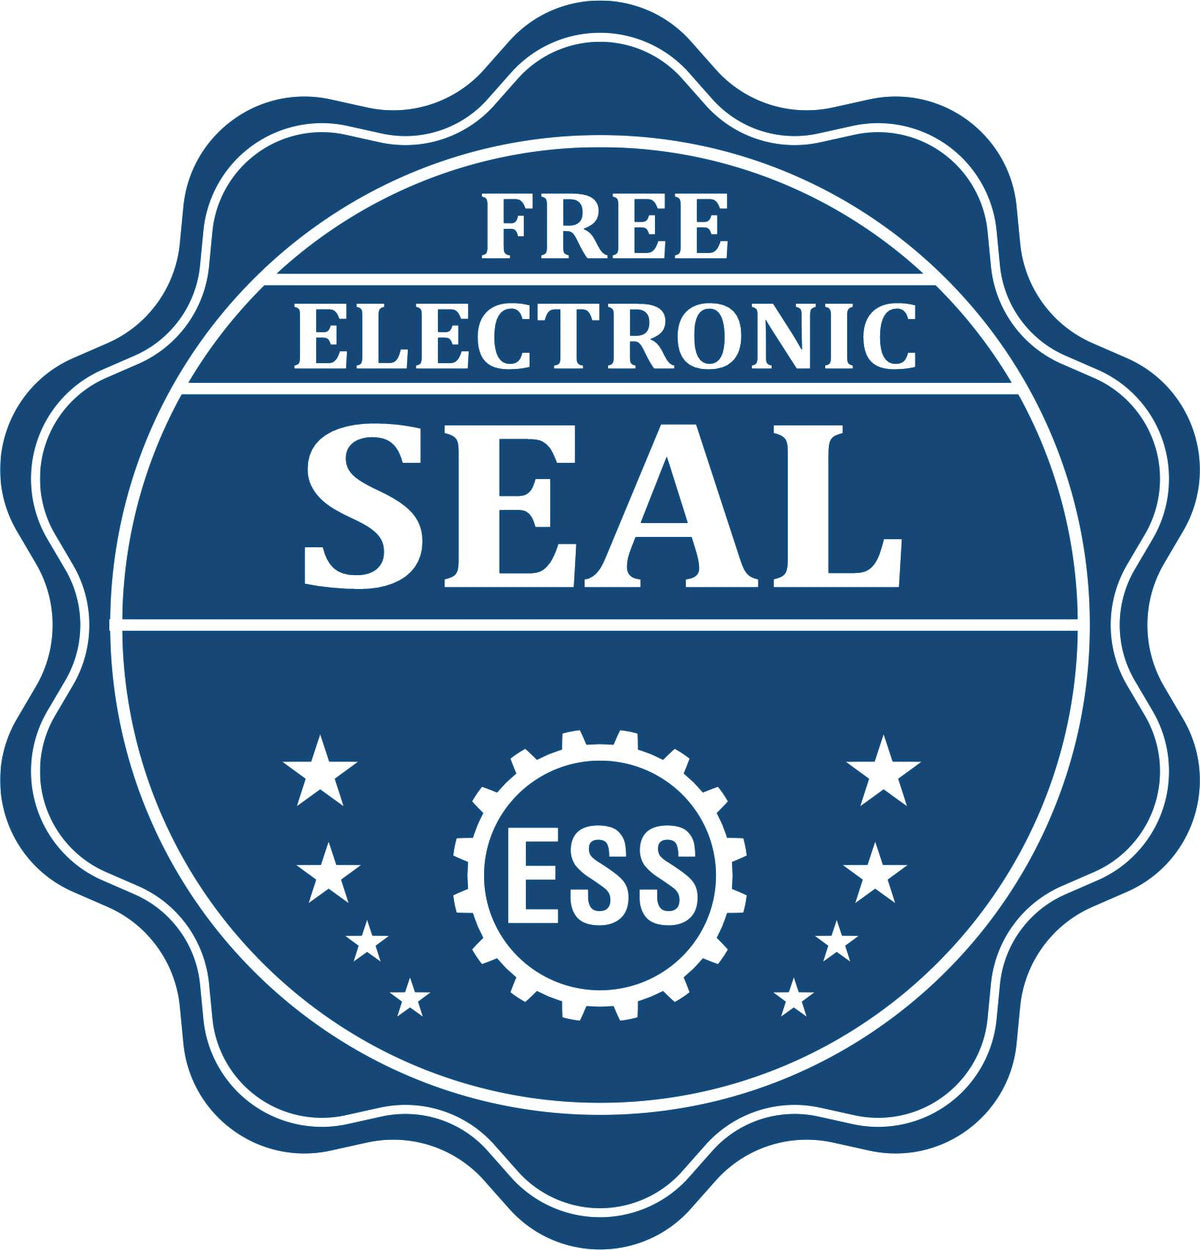 A badge showing a free electronic seal for the Tennessee Engineer Desk Seal with stars and the ESS gear on the emblem.